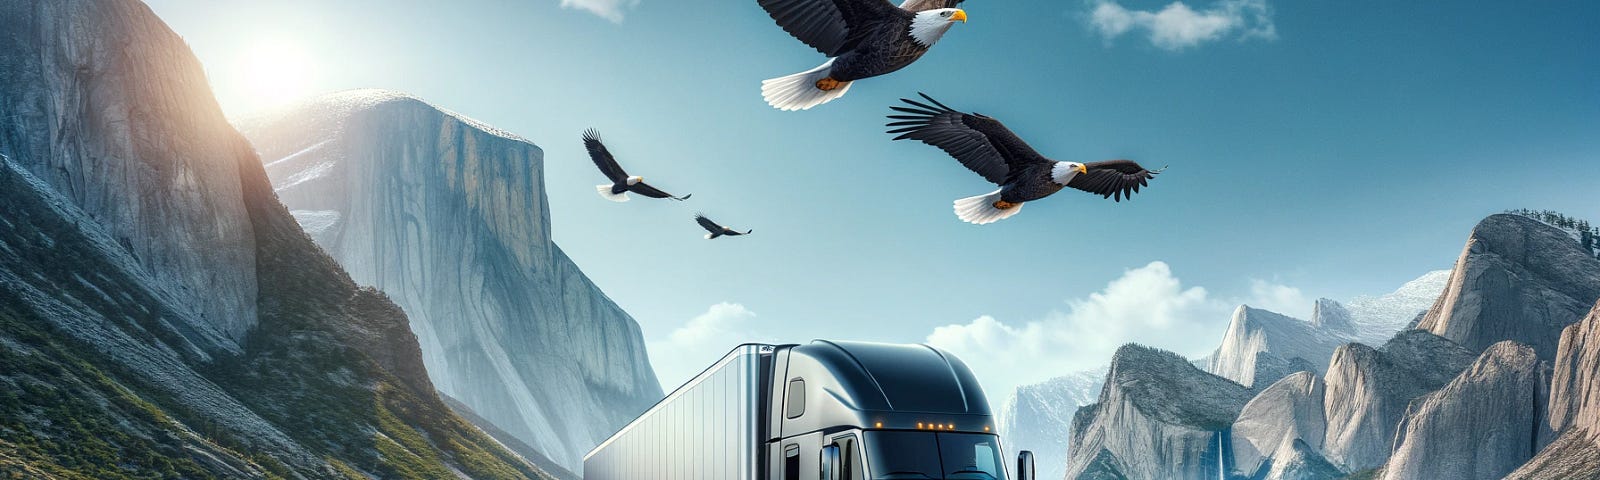 ChatGPT & DALL-E generated panoramic image depicting a battery electric, big 18-wheeler semi-truck on a mountain highway, under a bright sky with eagles soaring overhead.